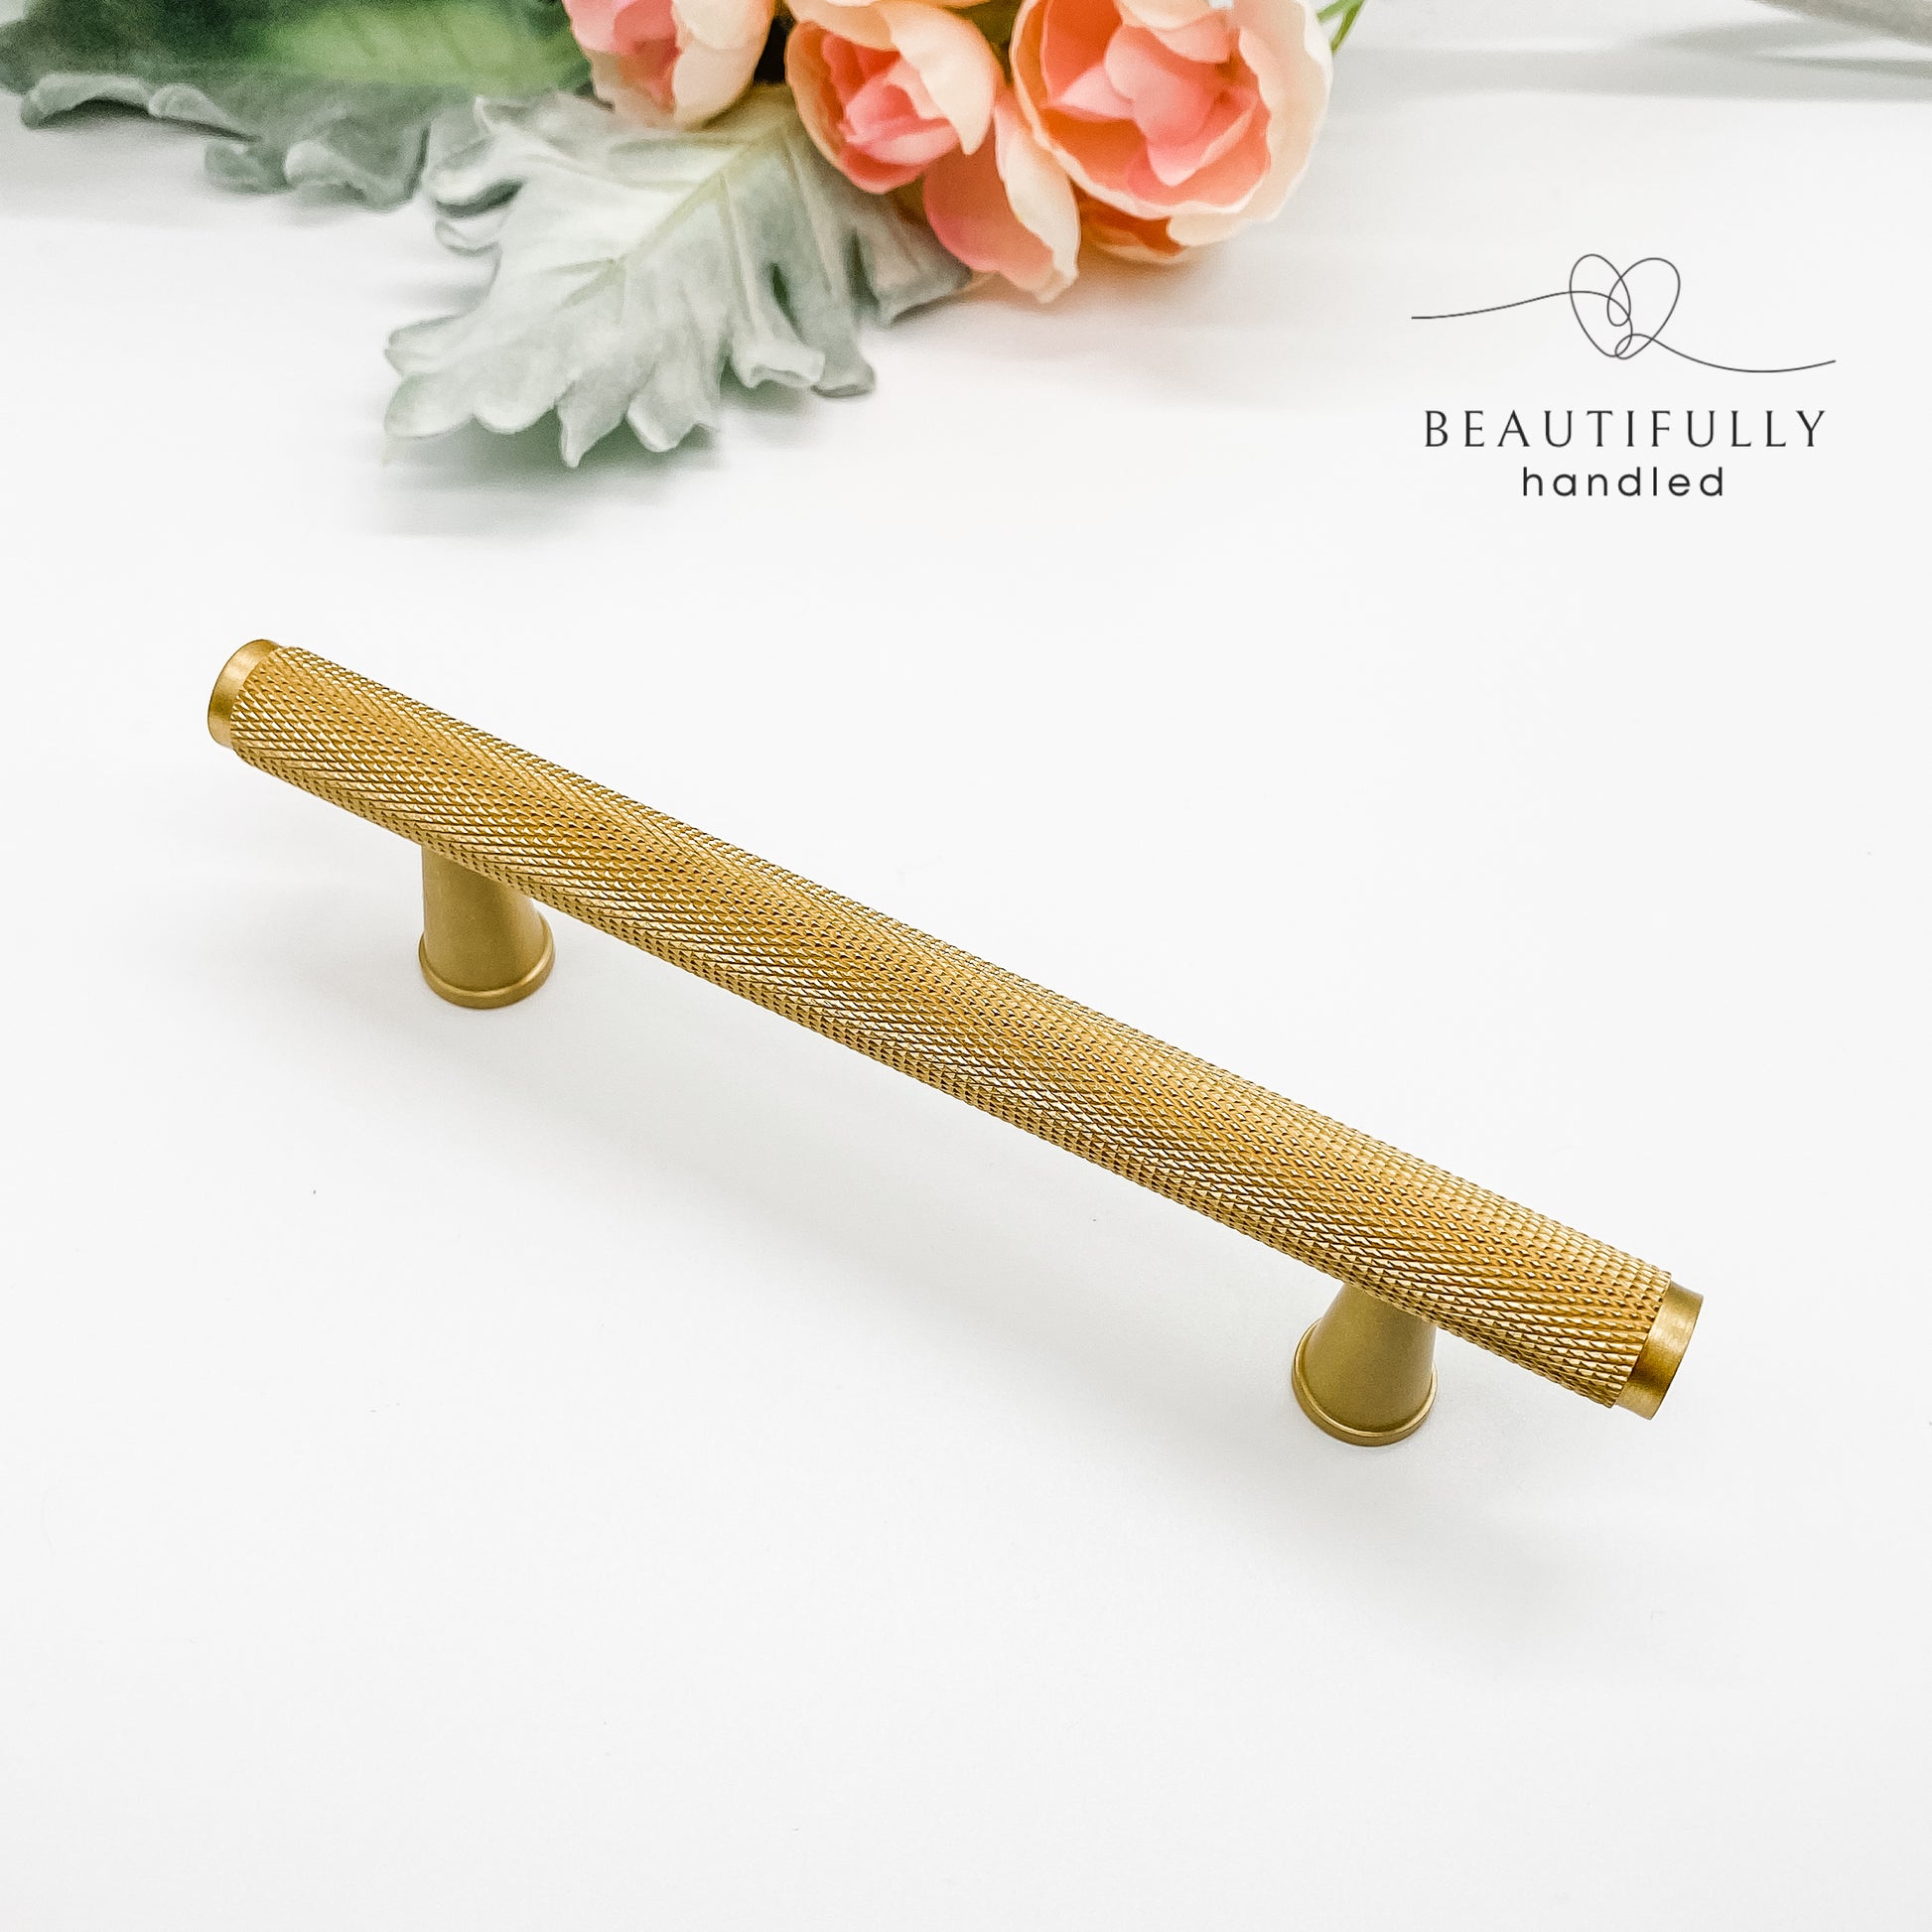 96mm solid brass knurled kitchen drawer handle on plain white background